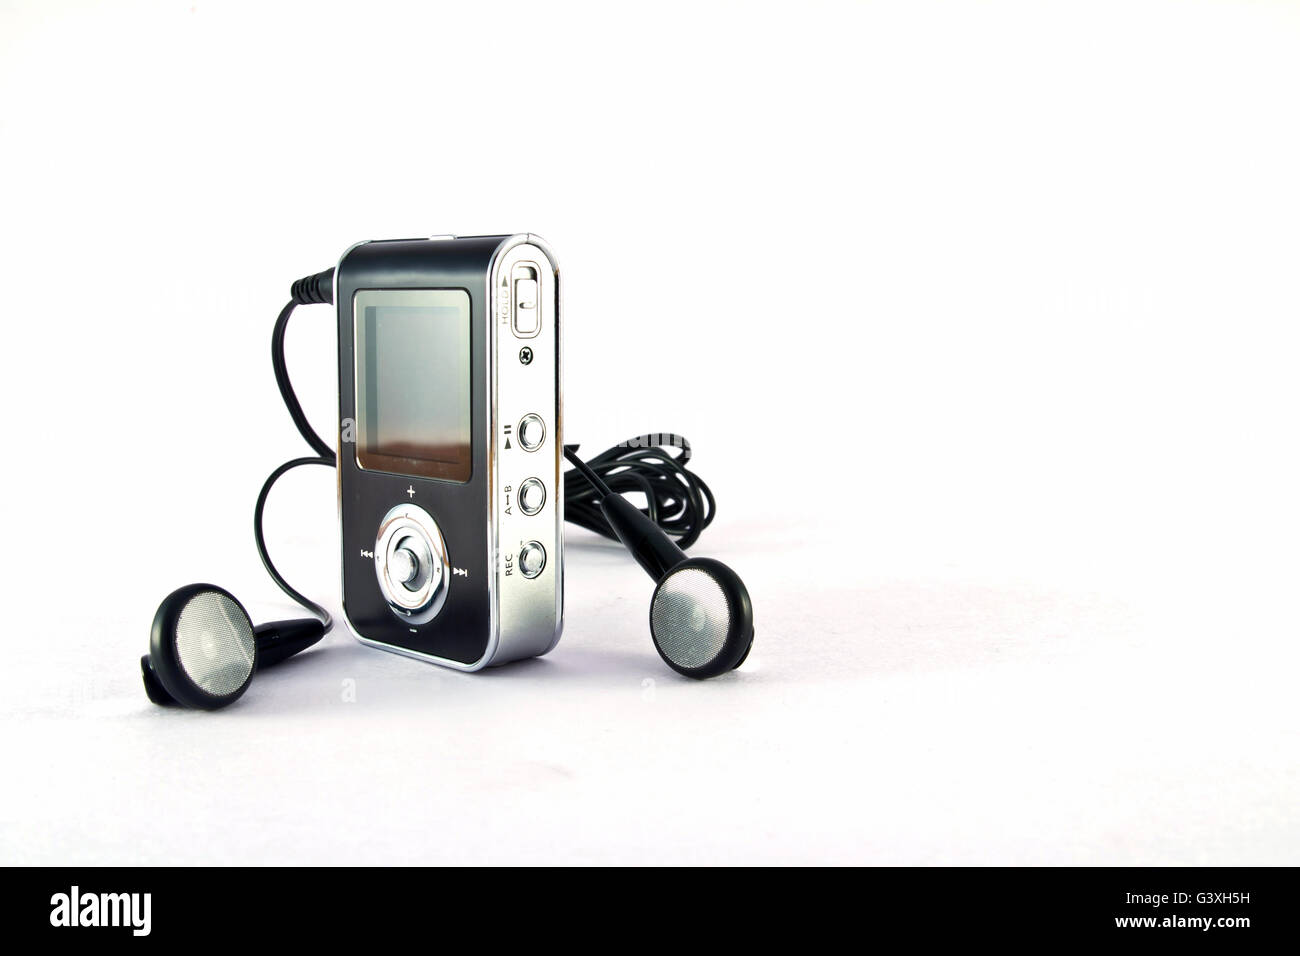 mp3 player and headphones isolated on white background Stock Photo